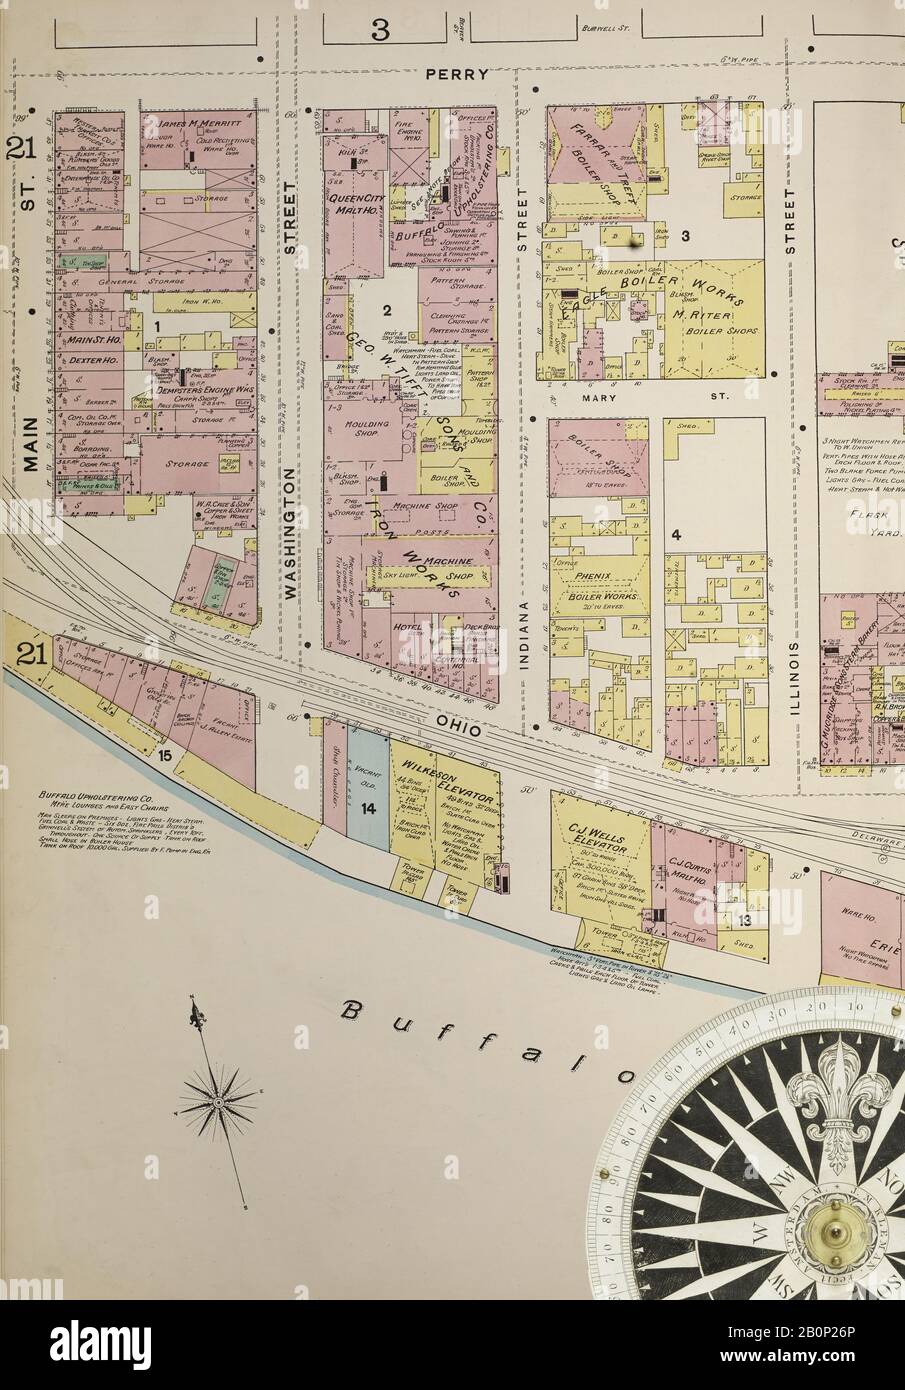 Image 7 of Sanborn Fire Insurance Map from Buffalo, Erie County, New York. 1889-1893 Vol. 1, 1889. 85 Sheet(s). Includes Map of Elevator District. Double-paged plates numbered 1-40. Bound, America, street map with a Nineteenth Century compass Stock Photo